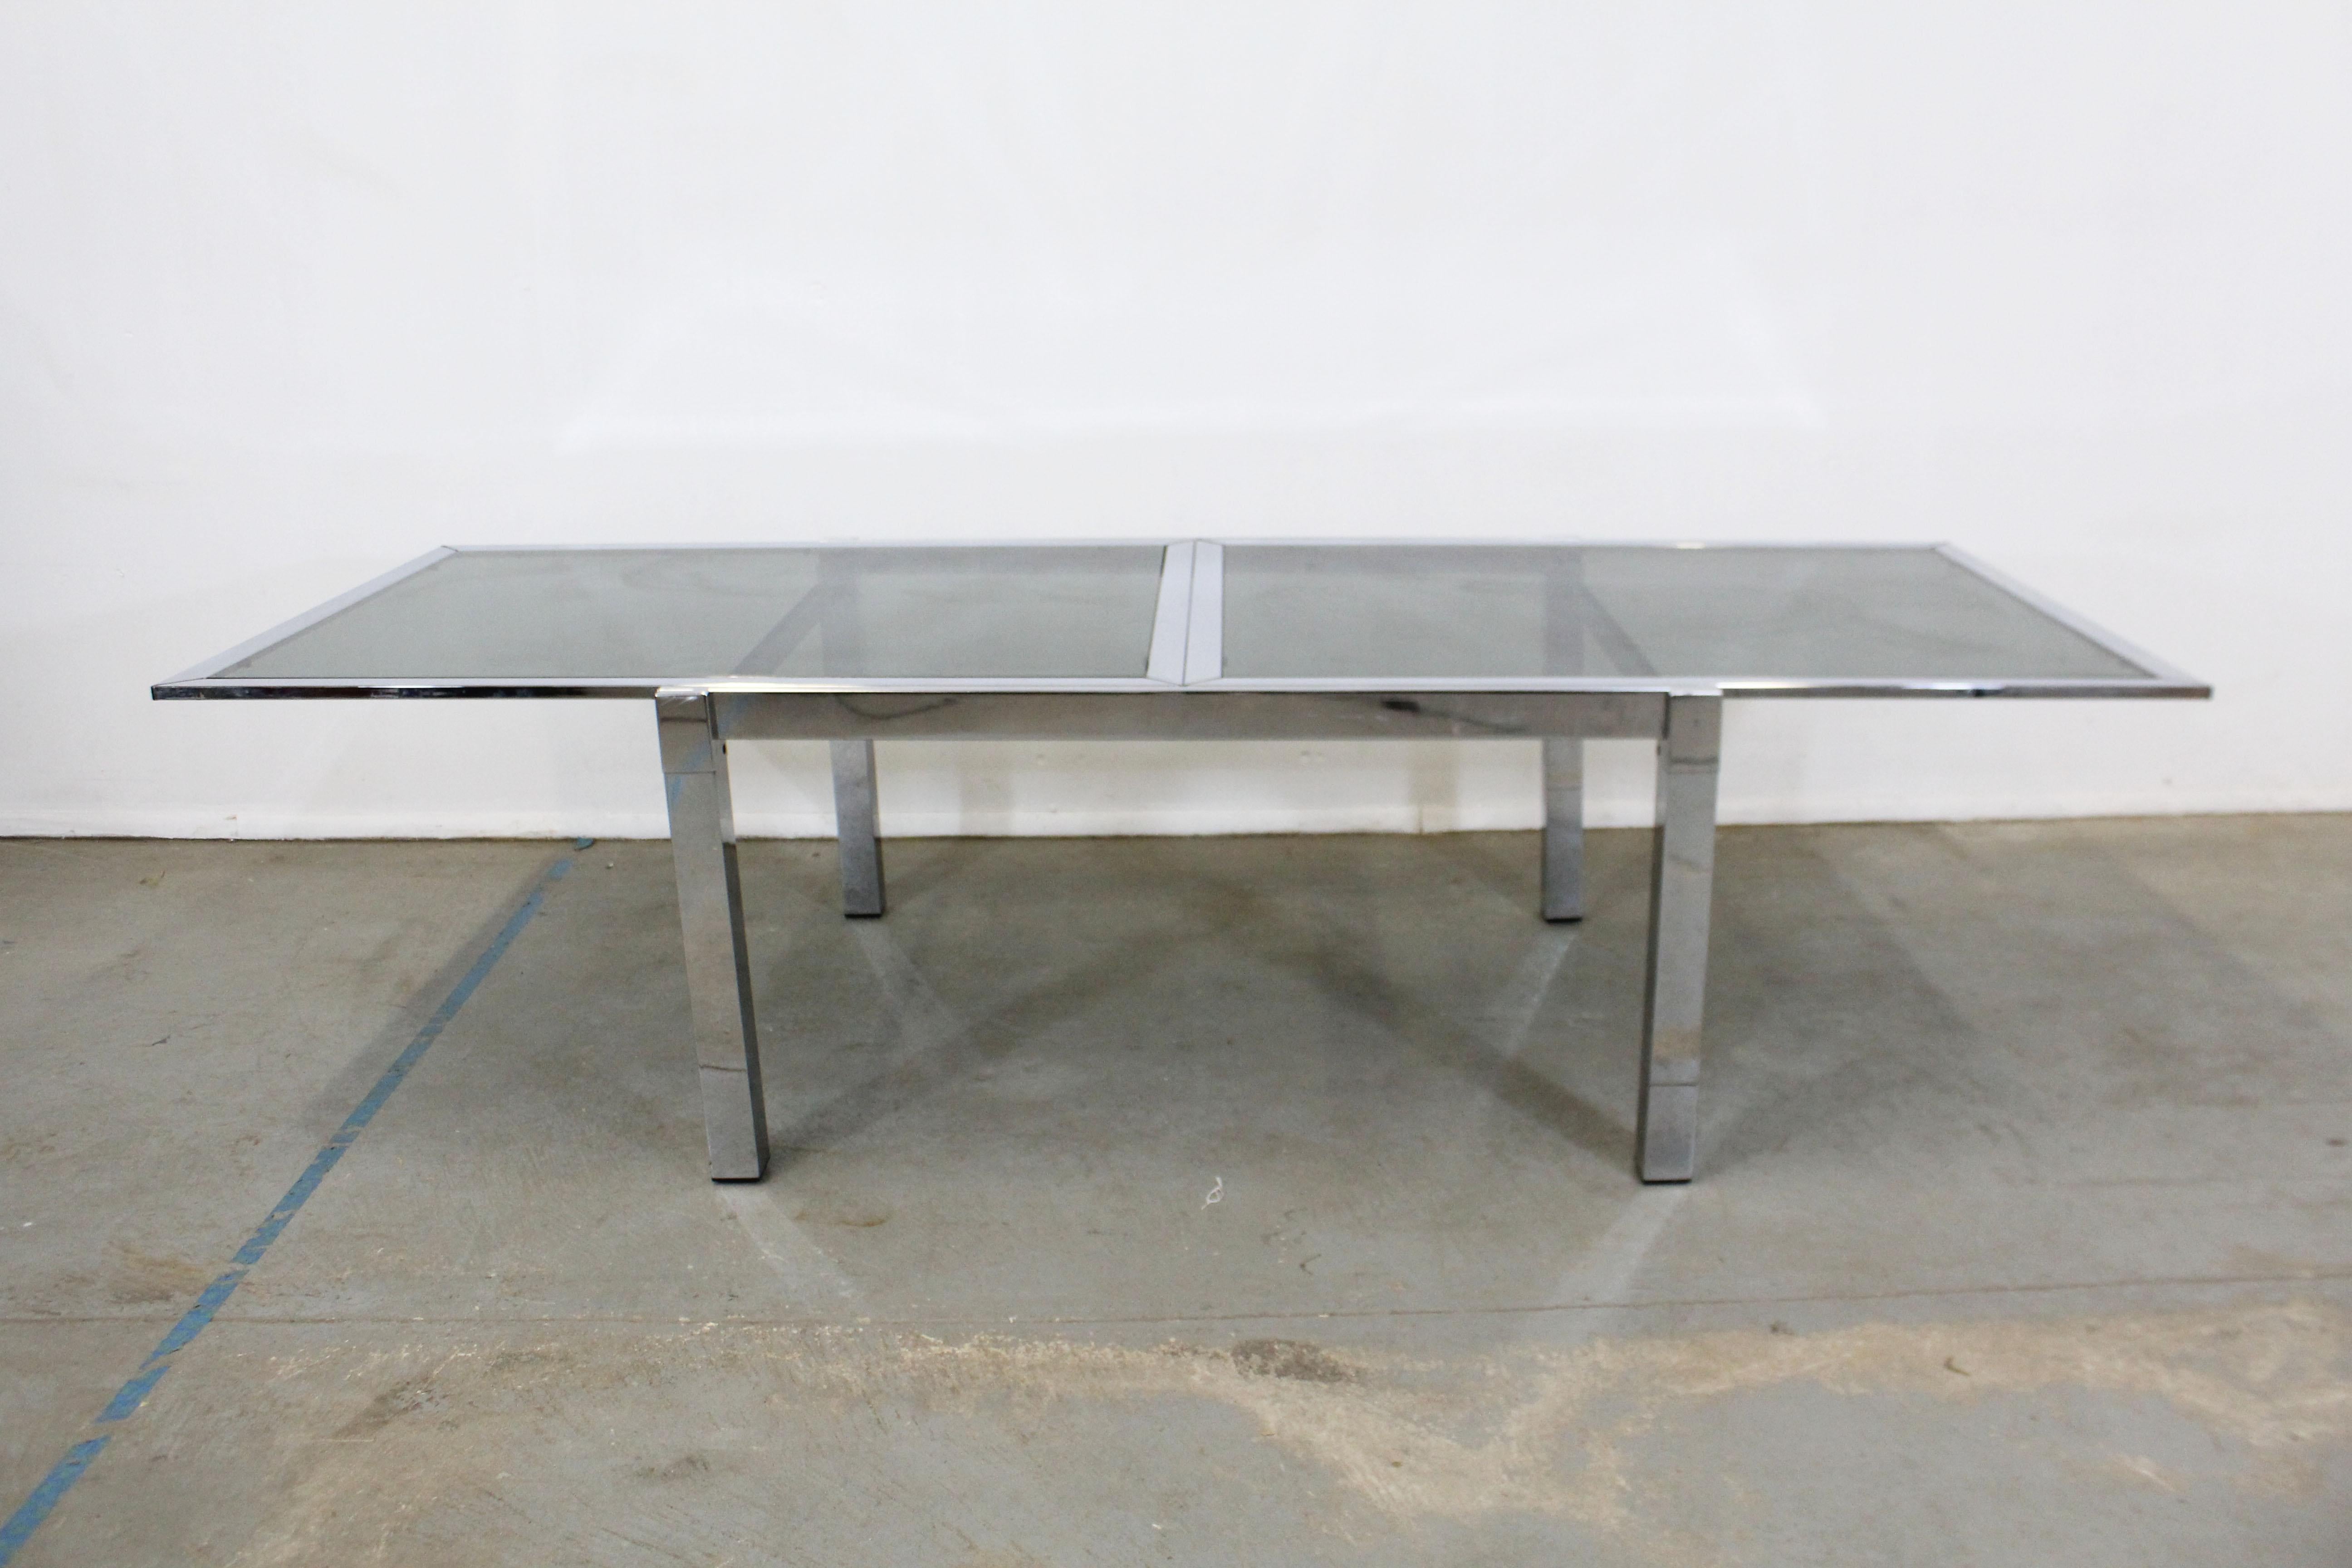 Offered is a DIA vintage Mid-Century Modern dining table. This table is made of chrome and has a smoky black glass top as well as an extension board underneath the top. The bottom pulls out to extend. It is in good condition with some light surface